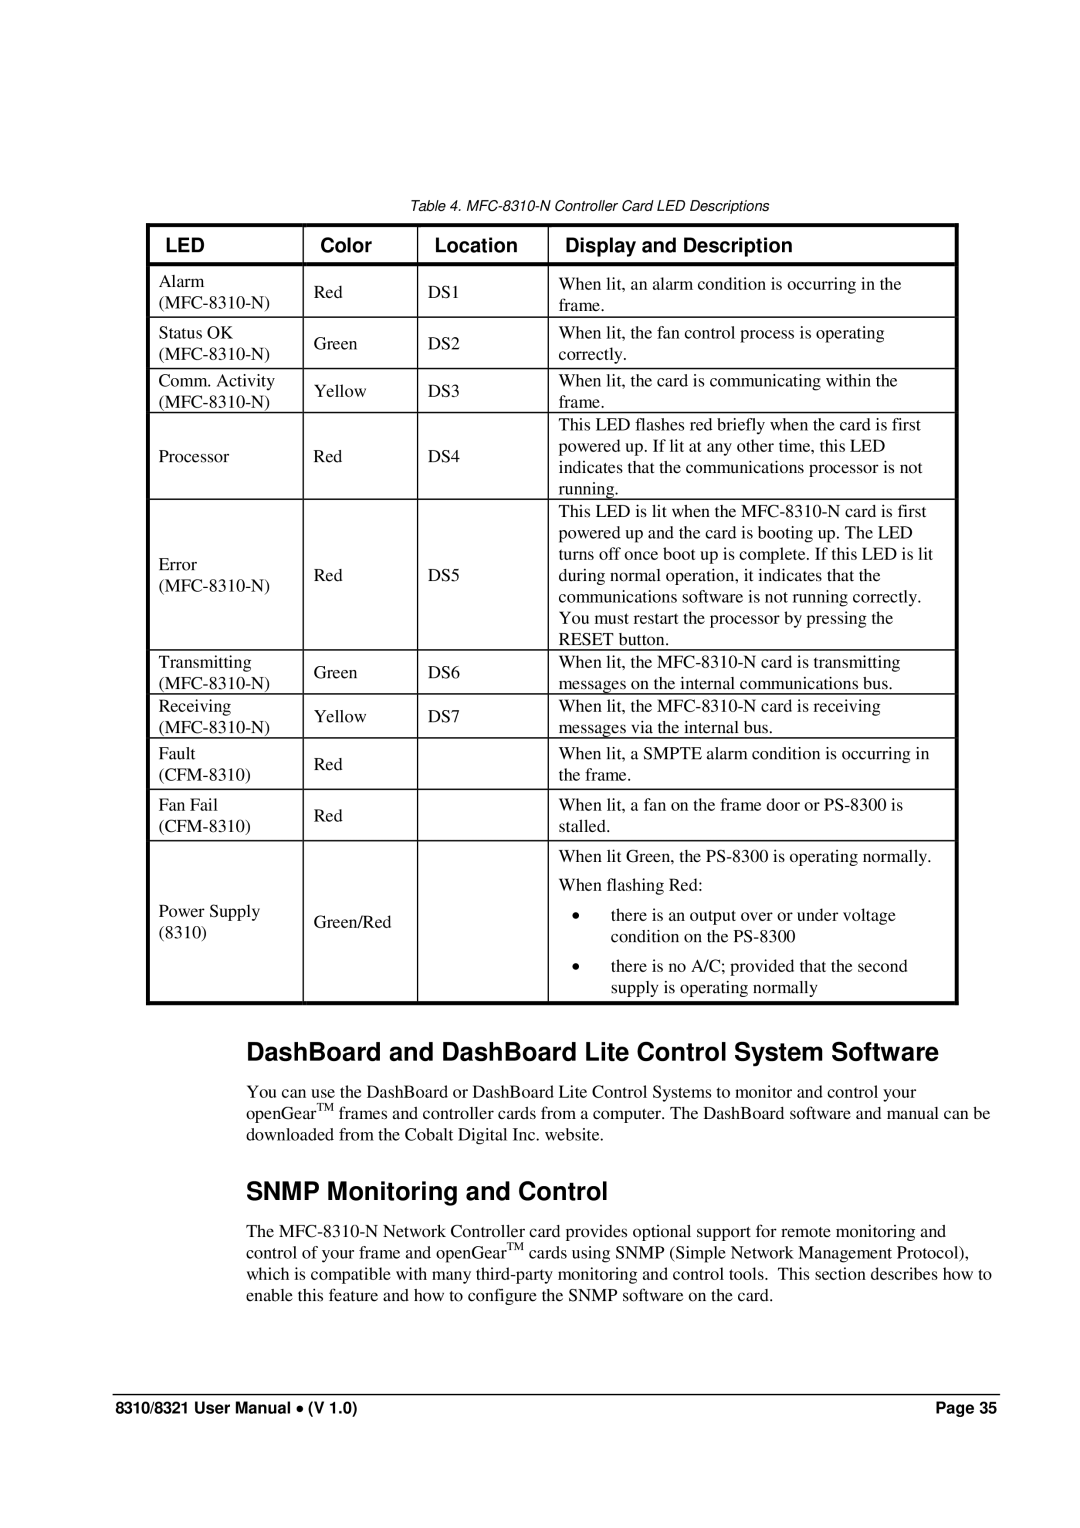 Cobalt Networks 8321(-C), 8310(-C) DashBoard and DashBoard Lite Control System Software, Snmp Monitoring and Control 